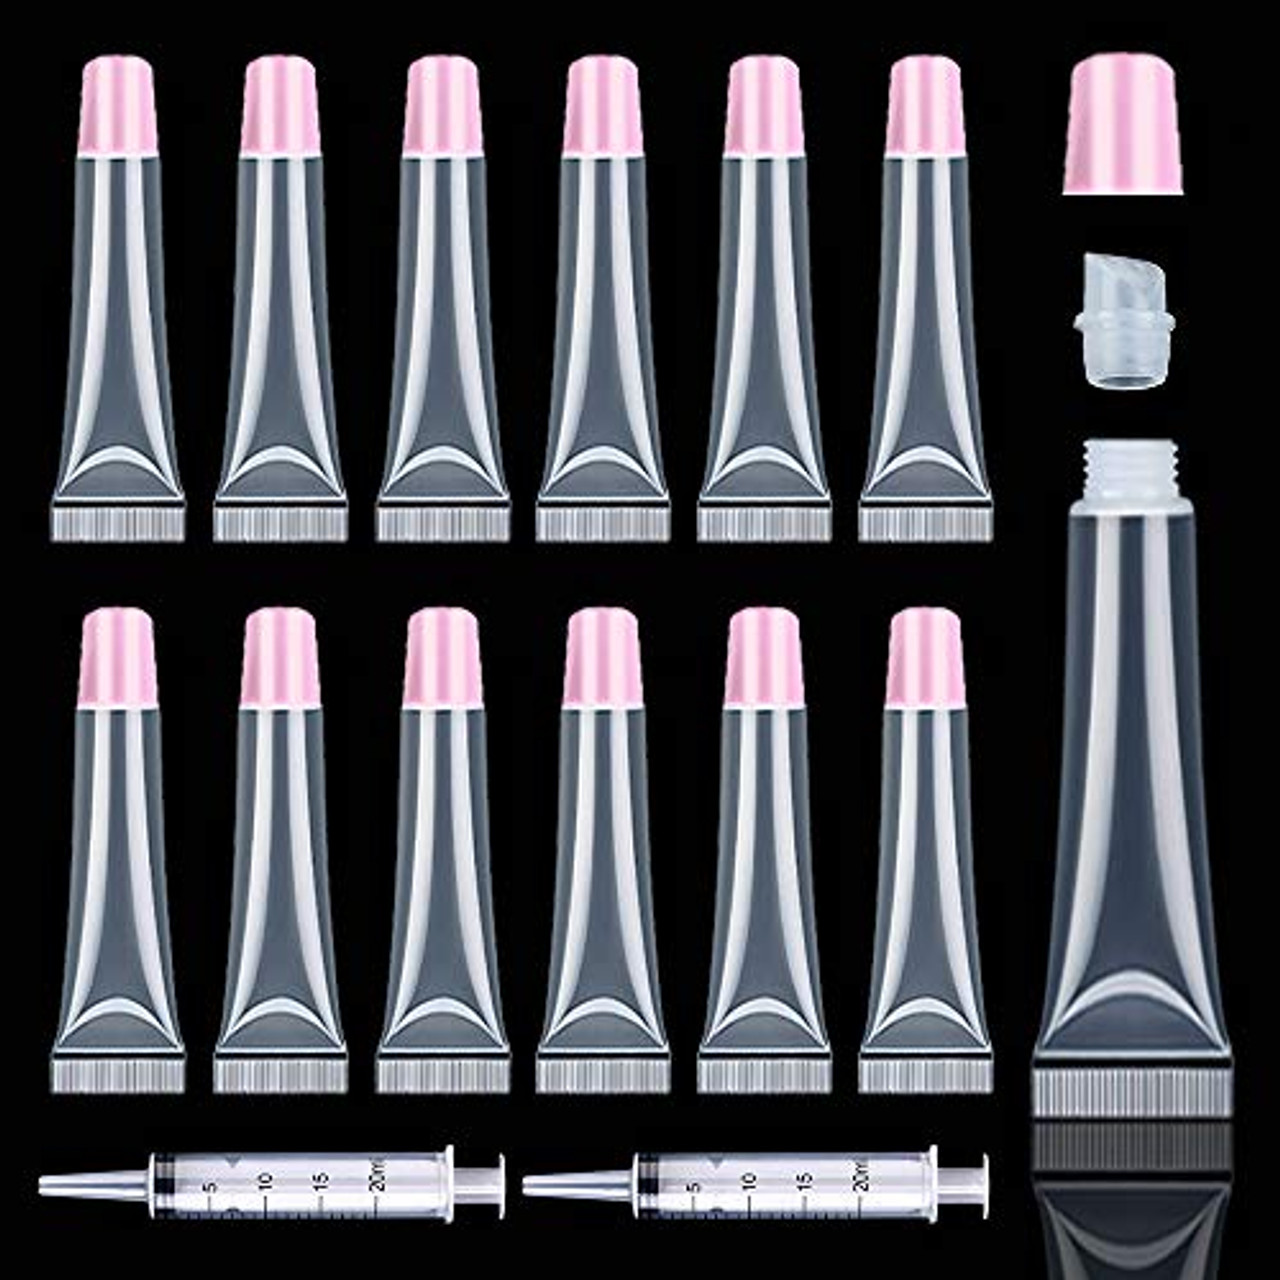 AMORIX 50PCS Lip Gloss Tubes 20ml Pink Cap Lip Gloss Containers Empty Lip  Balm Tubes Refillable Cosmetic Squeeze Lipgloss Tubes + 2 x 20ml Syringes  Tag Labels for DIY Lip Gloss Glitter